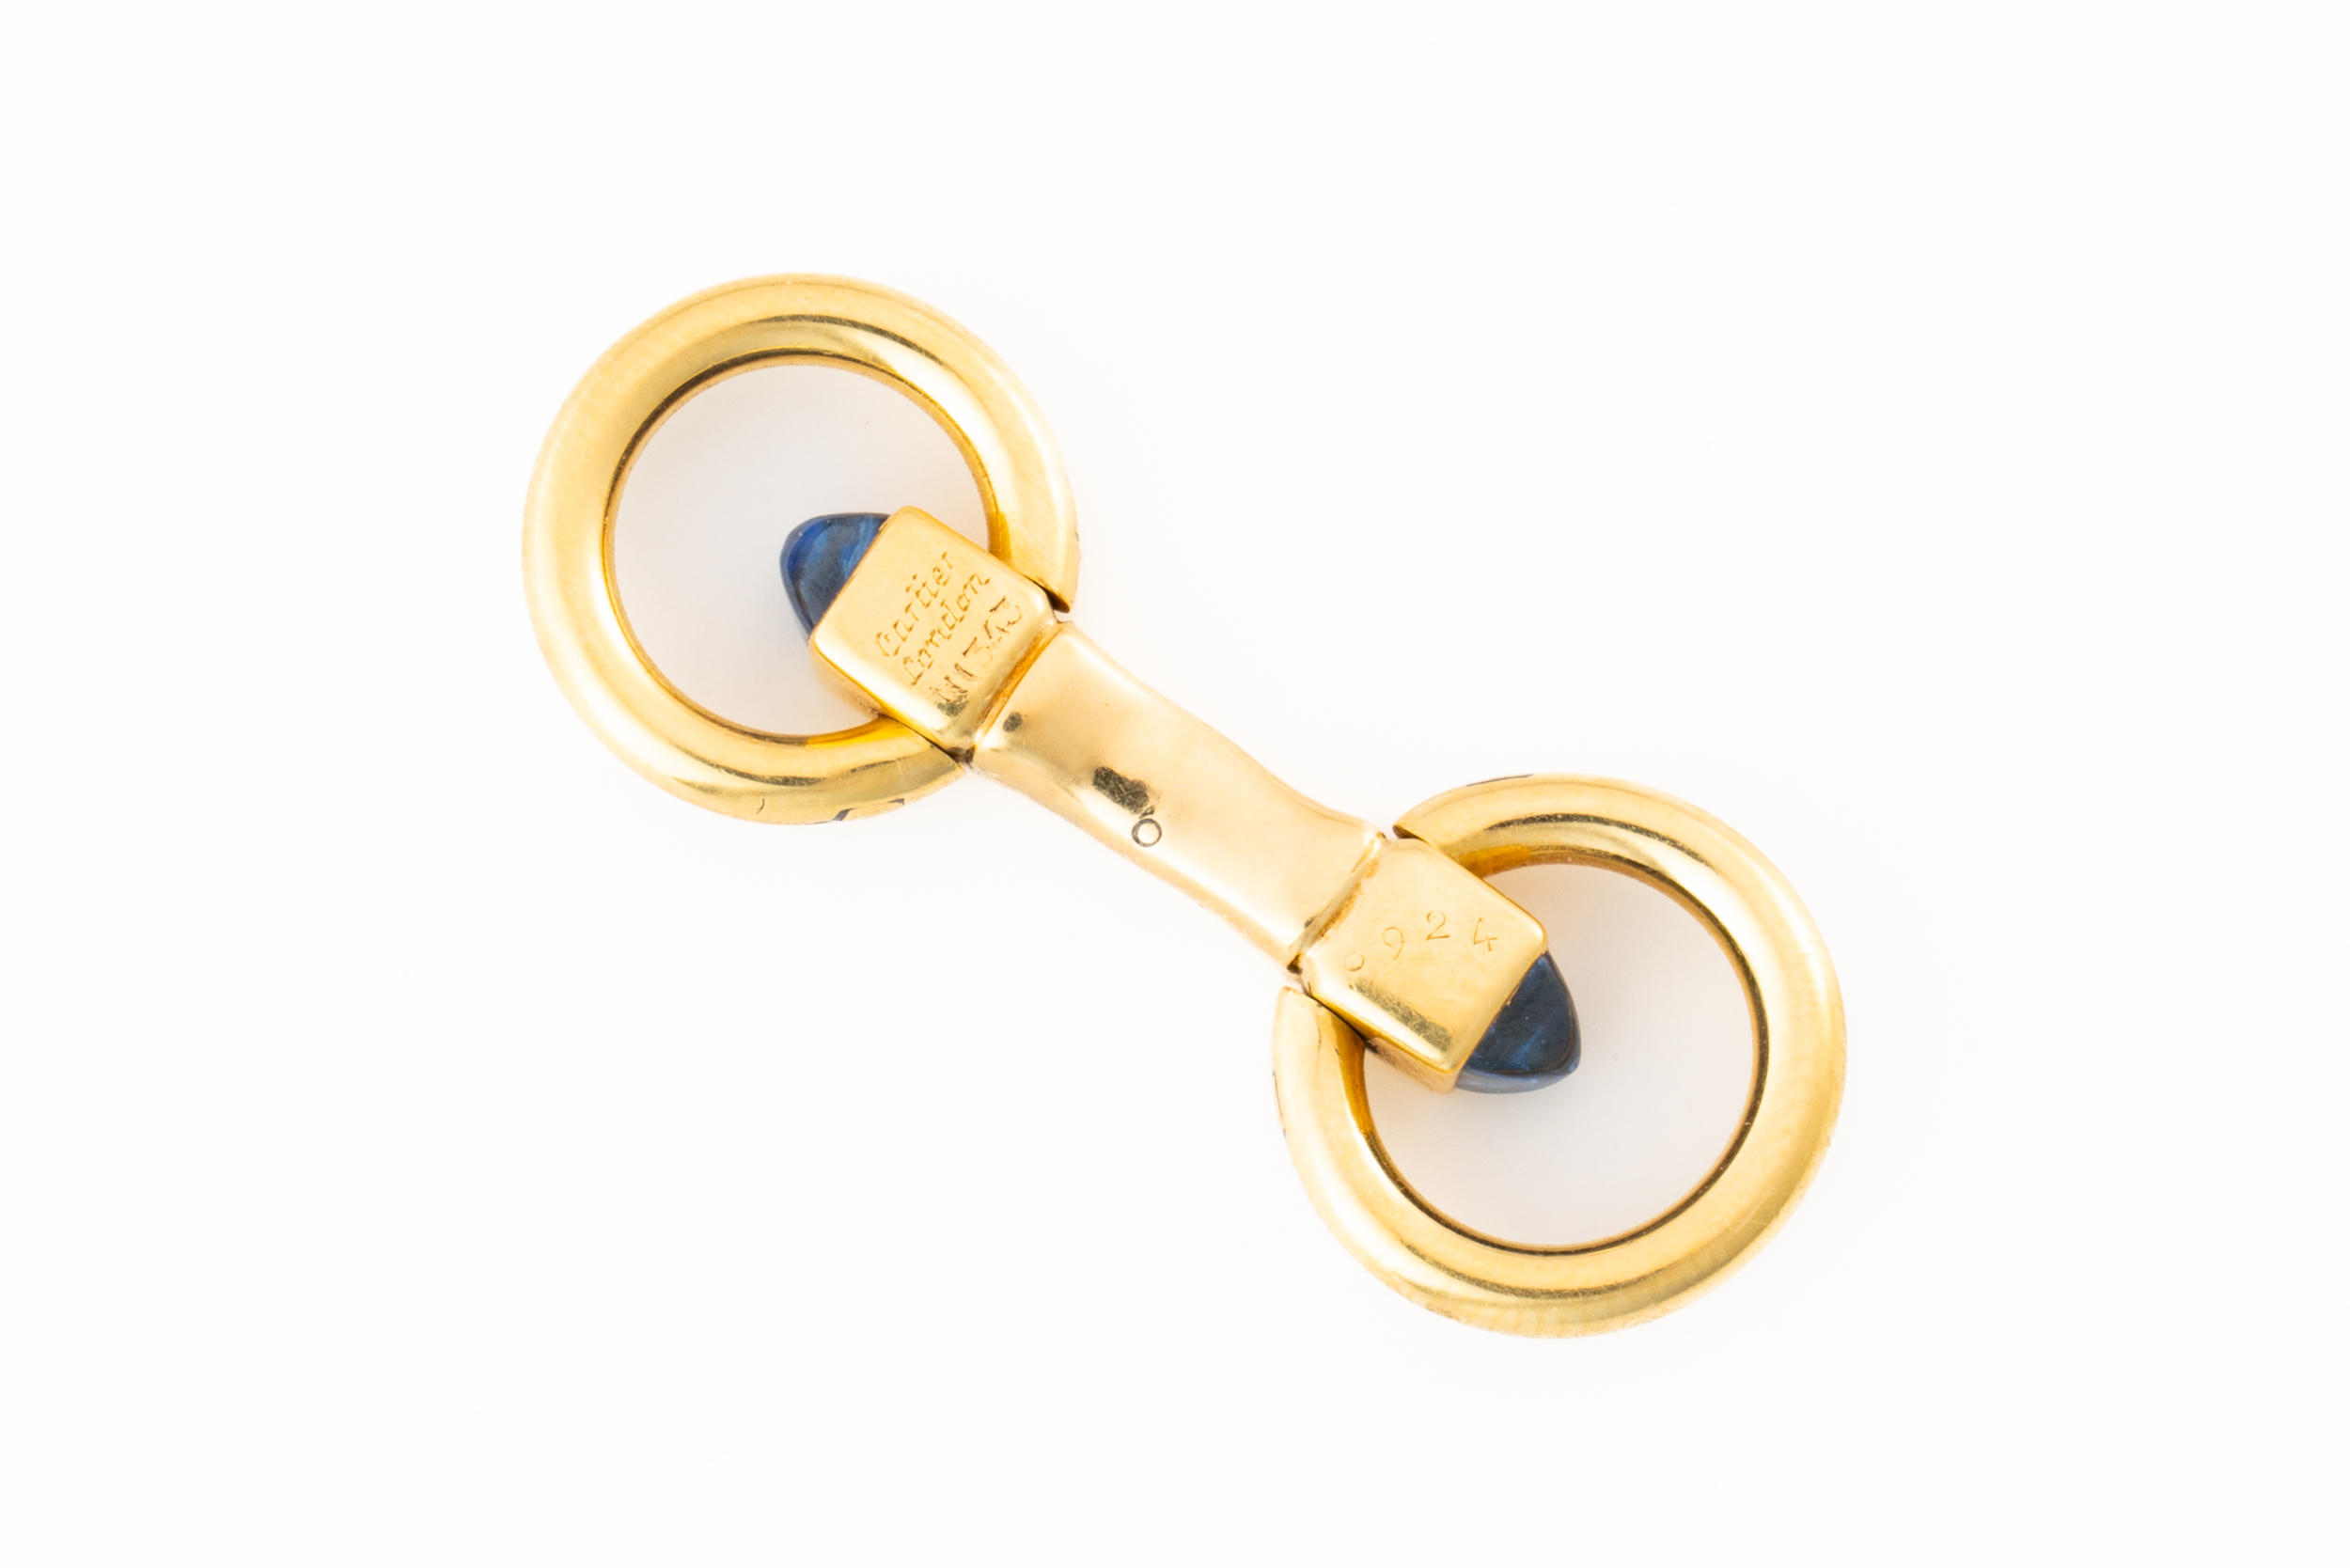 A CARTIER LONDON GOLD AND SAPPHIRE SINGLE CUFFLINK - Image 2 of 2